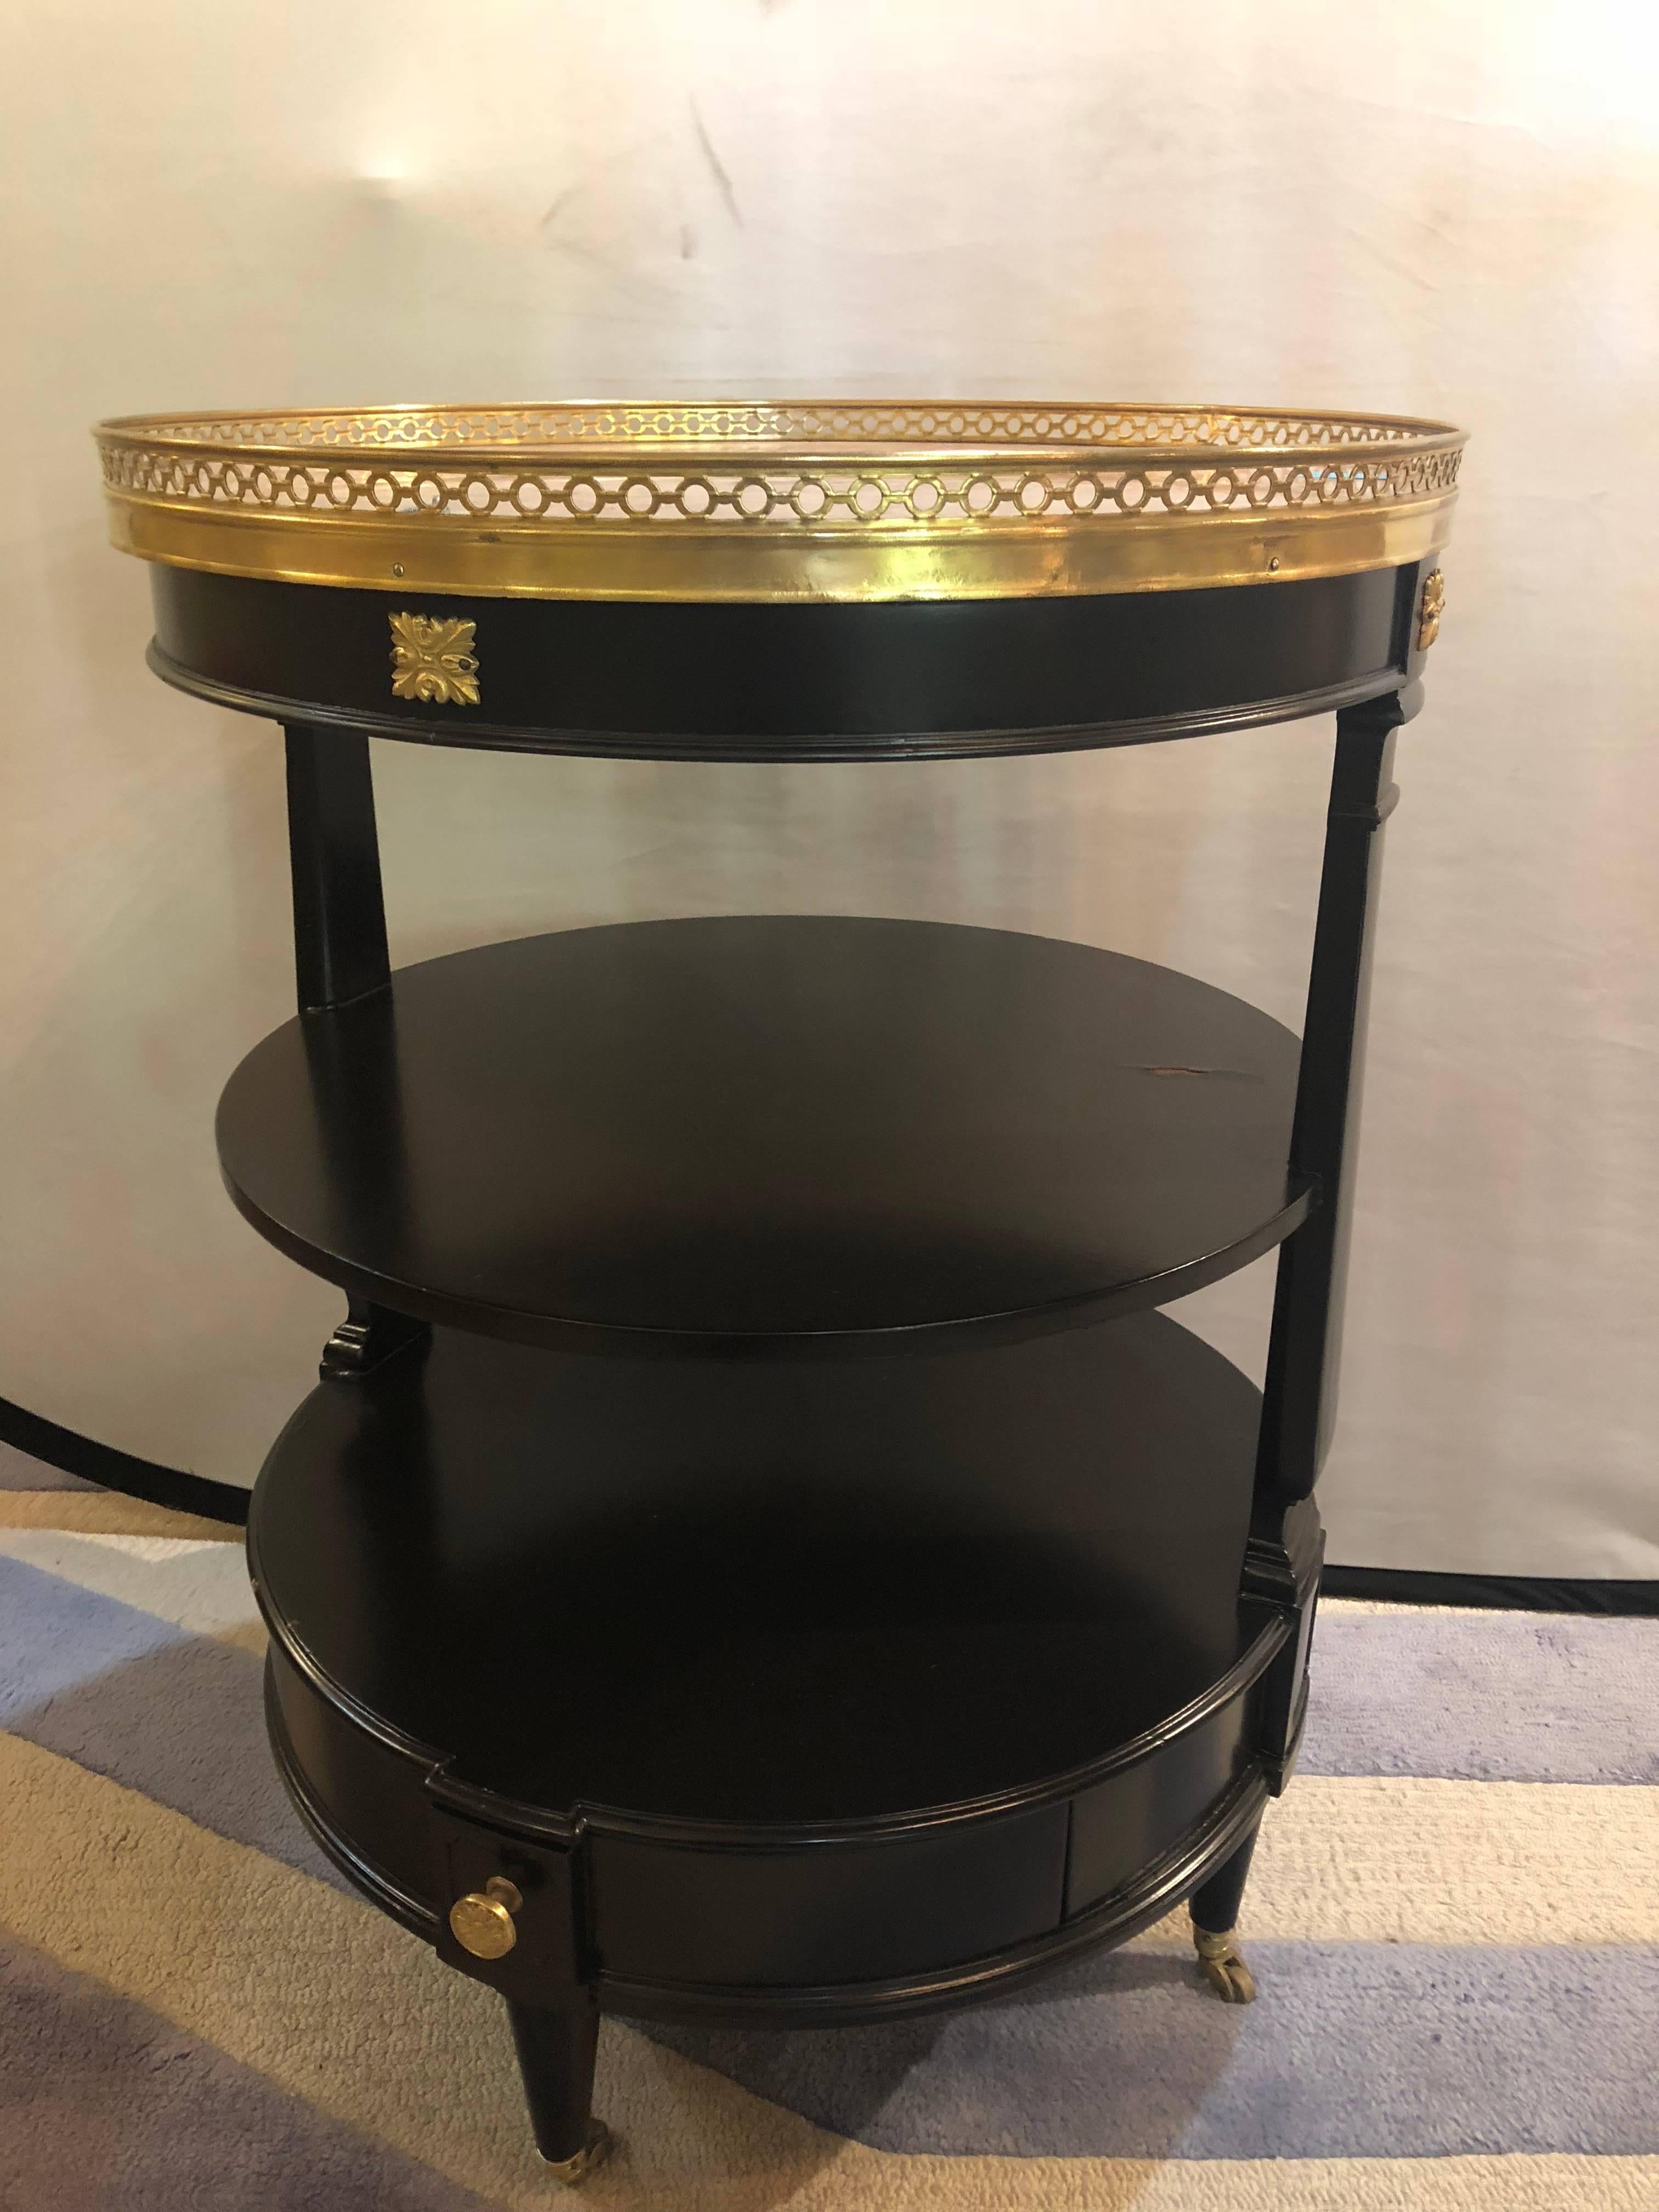 A three-tier Jansen style ebonized dumbwaiter bronze mounted with a marble top. A single oak secondary drawer on the bottom leading to three shelves, the top with a bronze pierced galleried marble. Having bronze decorative mounts on the apron as